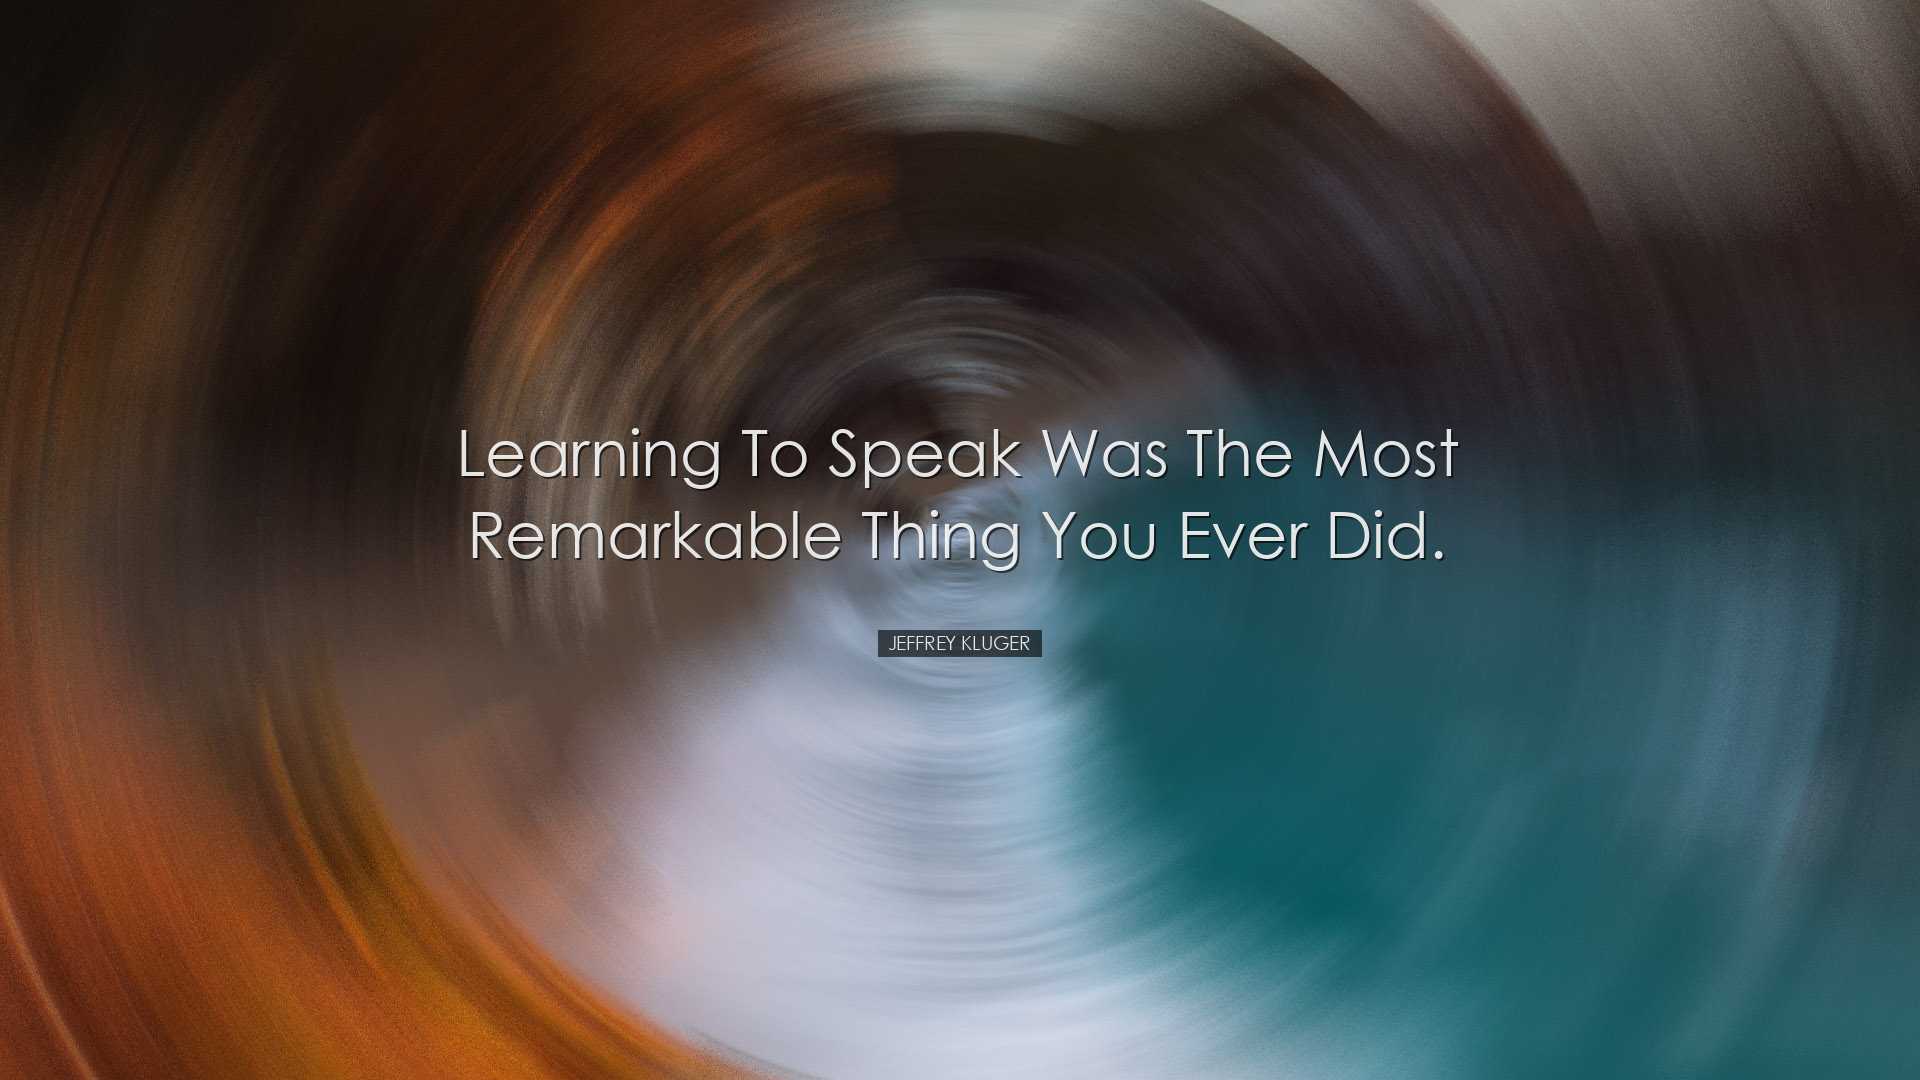 Learning to speak was the most remarkable thing you ever did. - Je